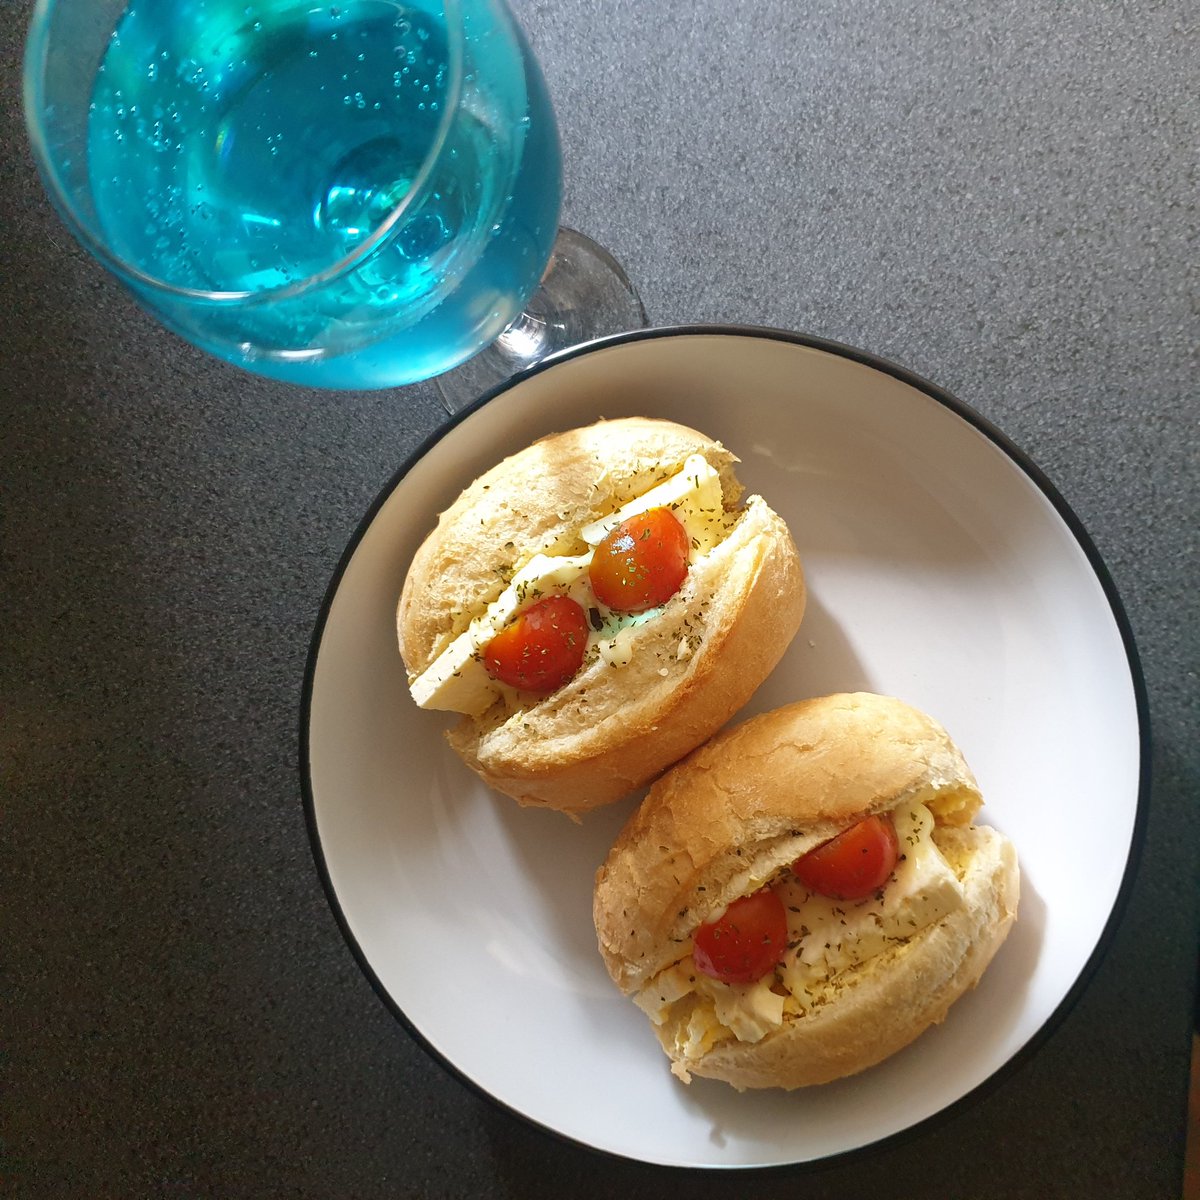 Cooking mums favourite meals #8 #cheeserolls with a #bluewkd 

#mentalhealth #mentalhealthawareness #mentalhealthuk #depressionawareness #anxietyawareness #mumsmeals #grief #bereavement #lunch #positivewithfood #cookingthroughbereavement #Lancashirecheese #tomato #saladcream